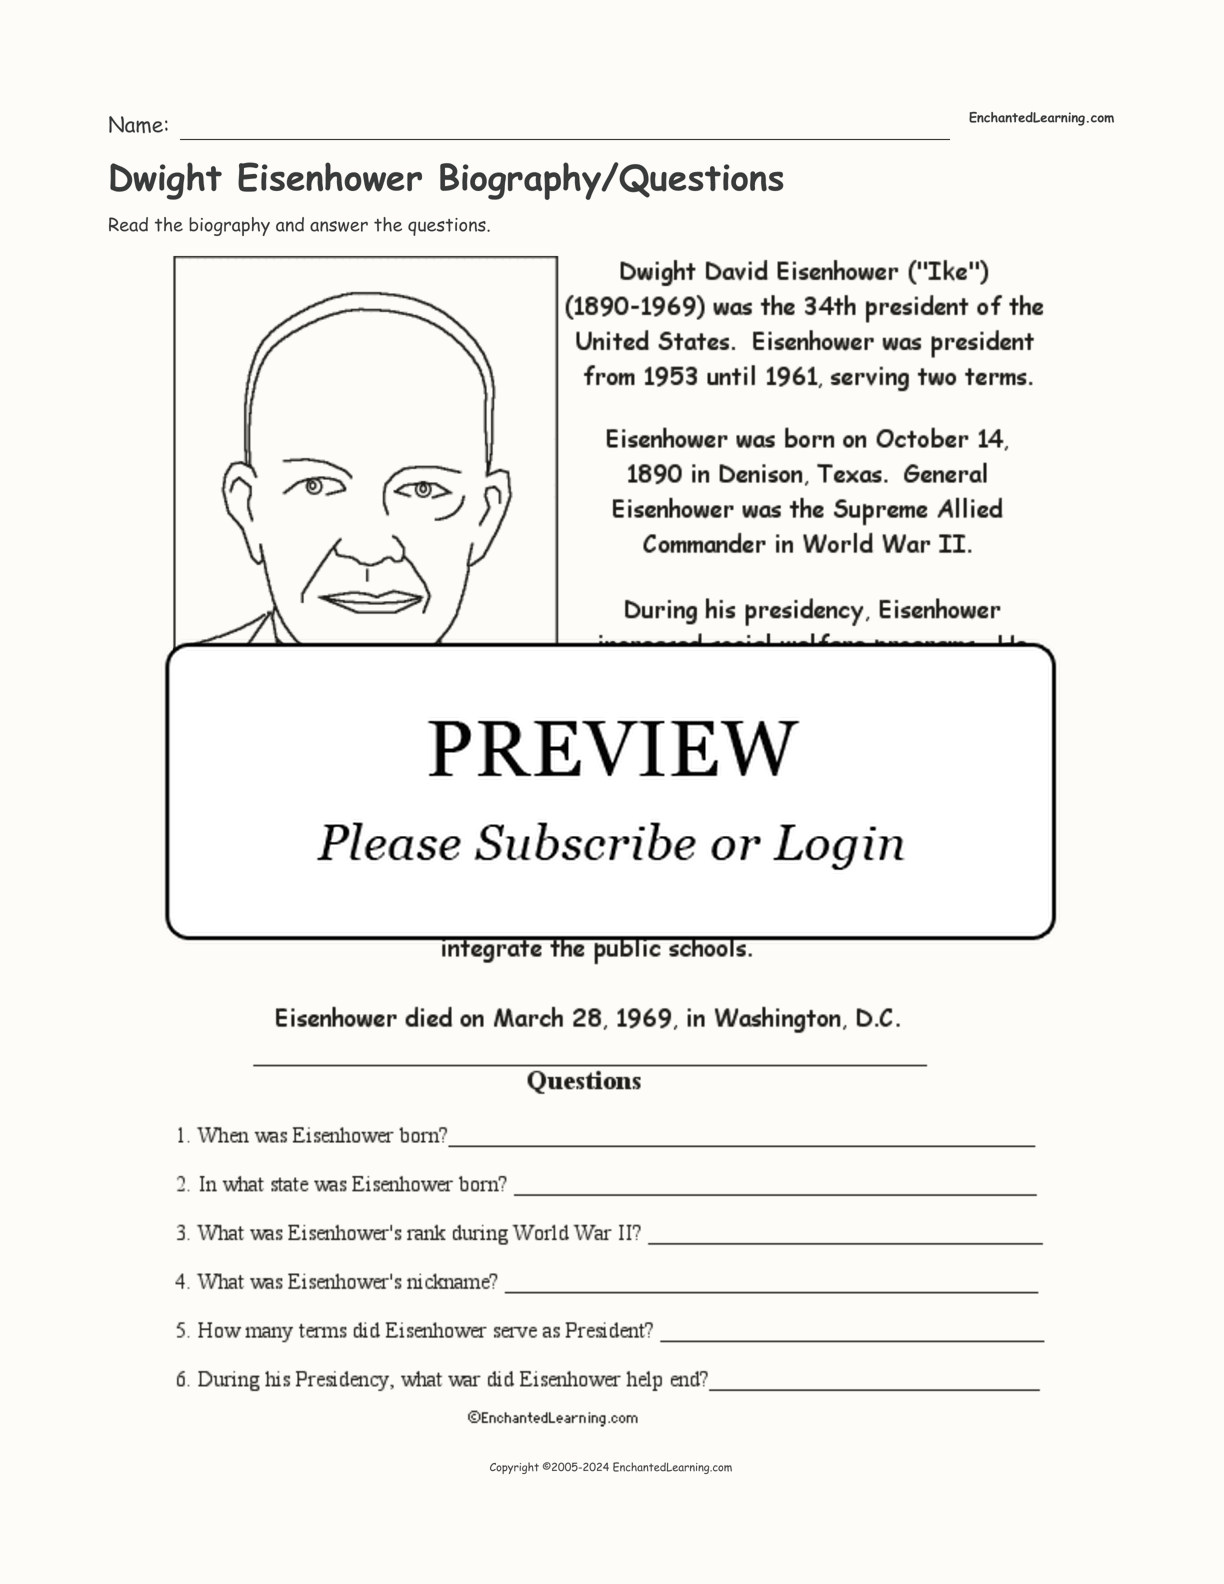 Dwight Eisenhower Biography/Questions interactive worksheet page 1